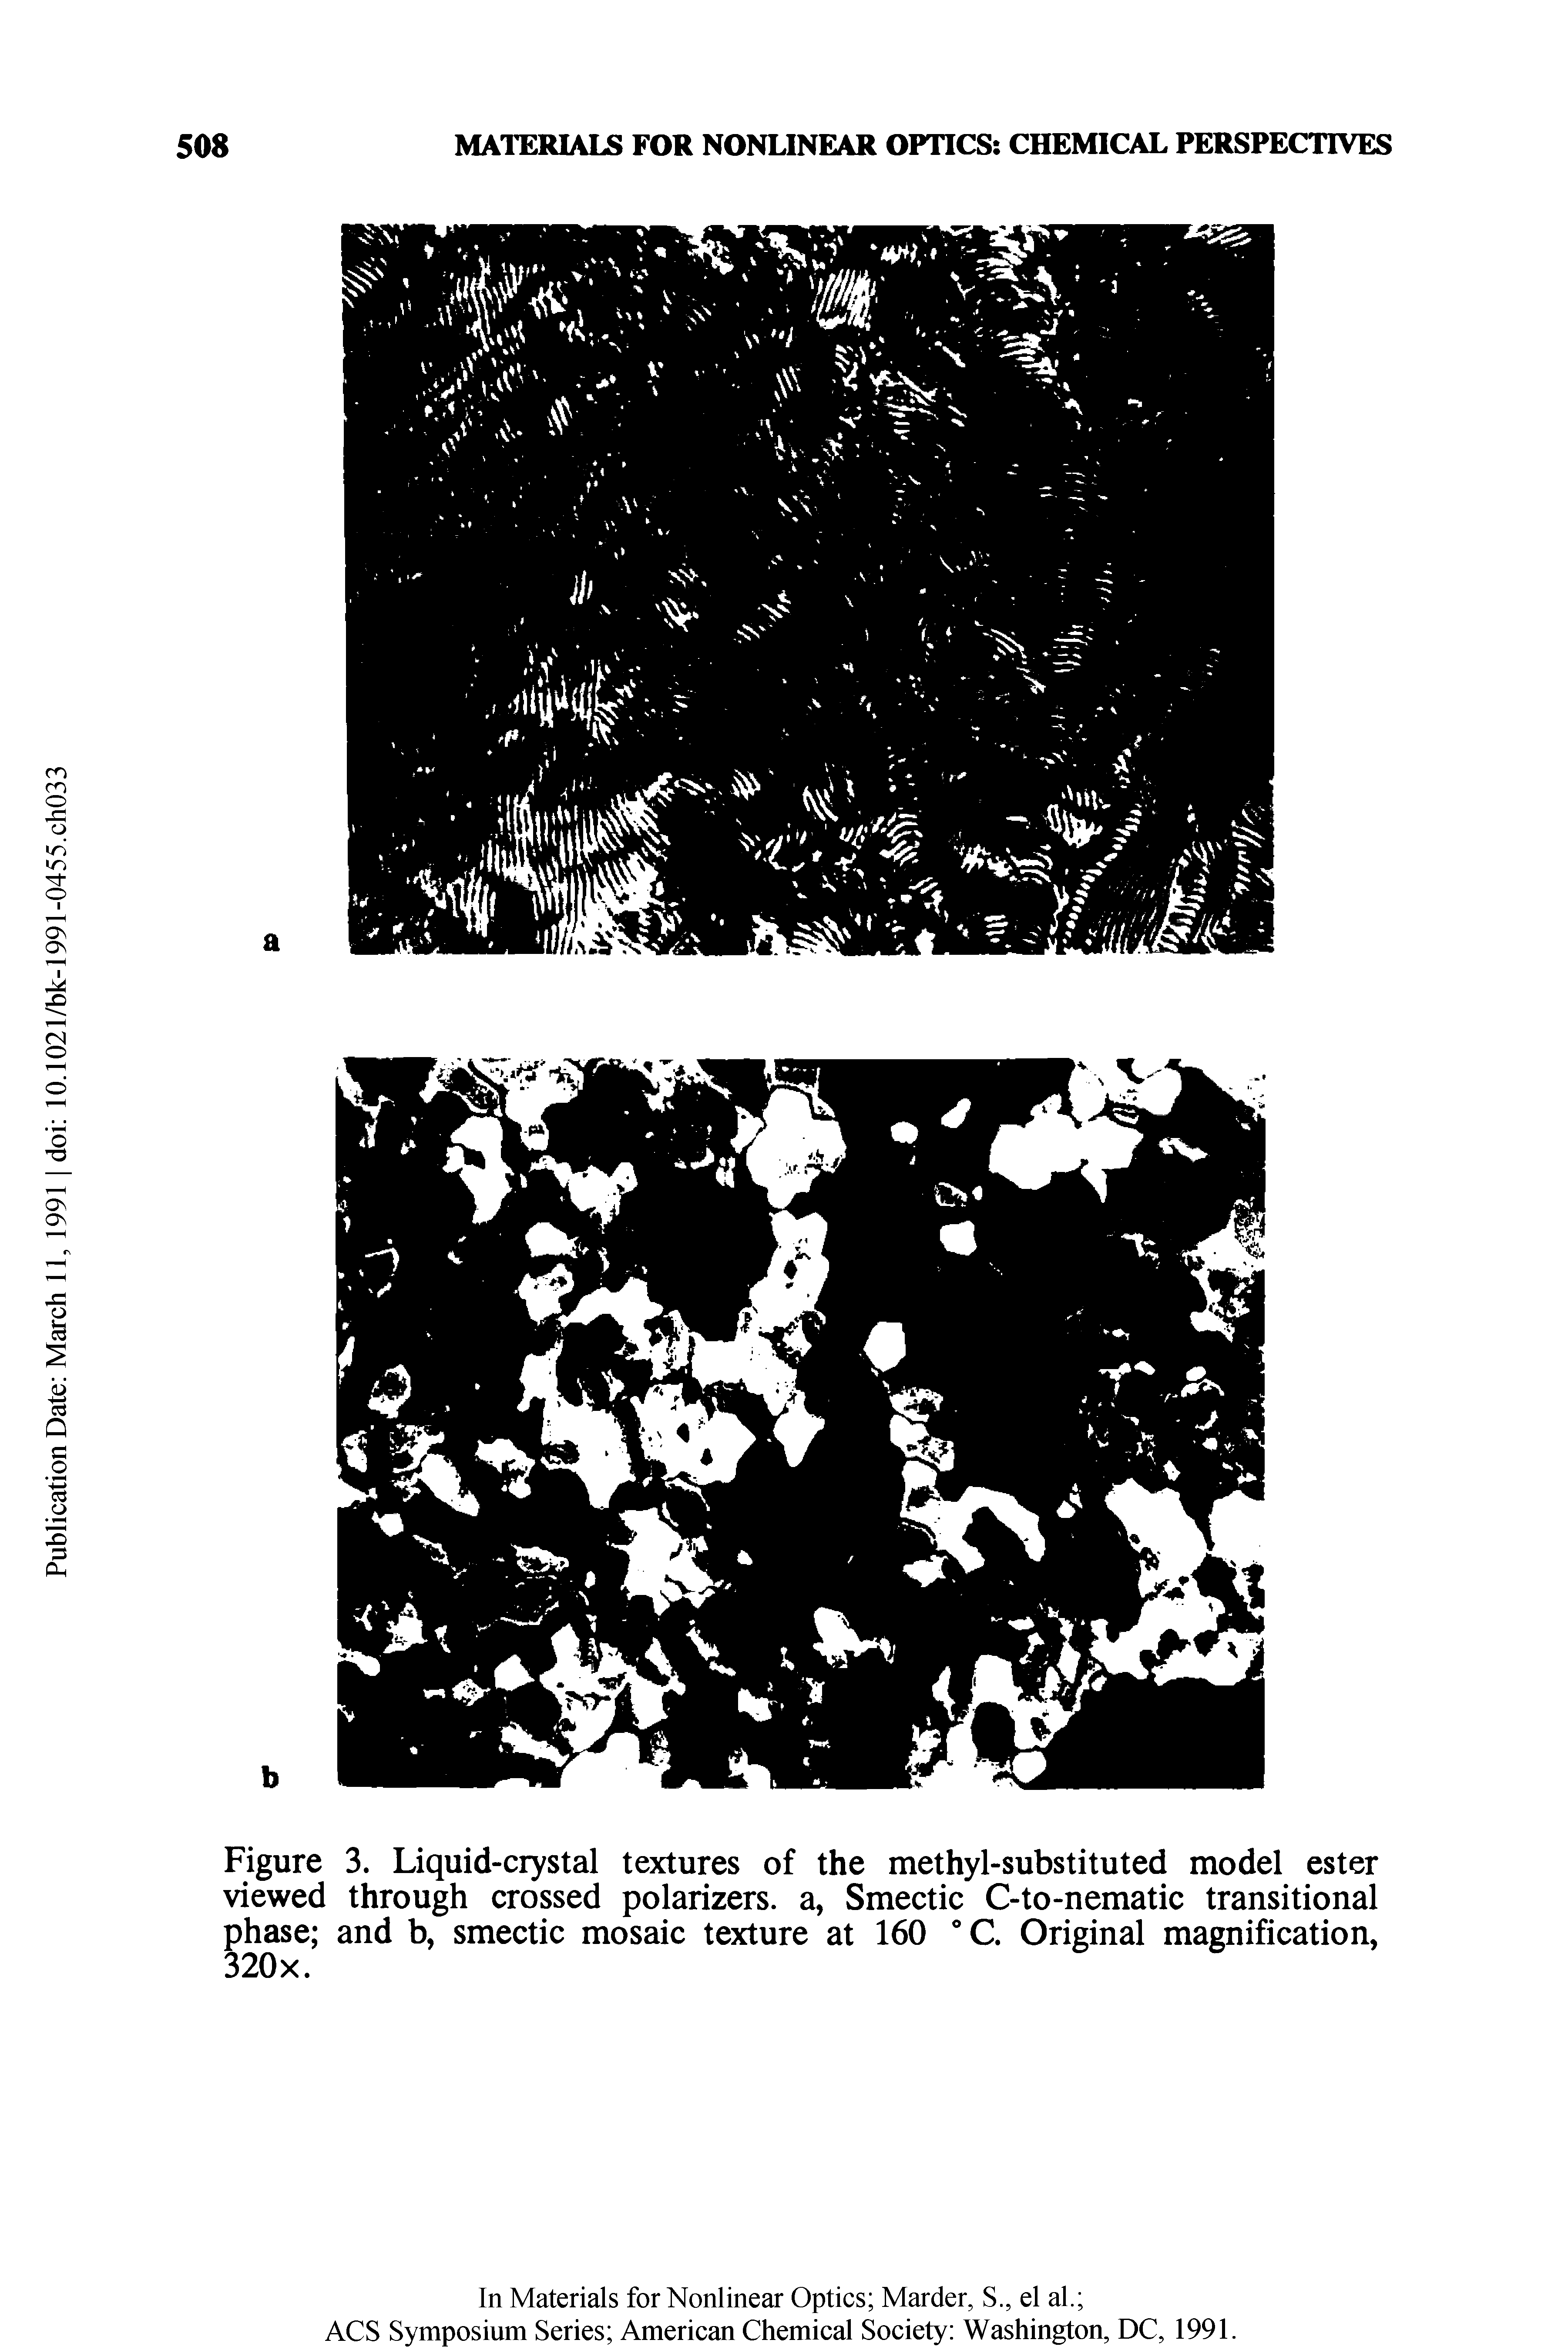 Figure 3. Liquid-crystal textures of the methyl-substituted model ester viewed through crossed polarizers, a, Smectic C-to-nematic transitional phase and b, smectic mosaic texture at 160 °C. Original magnification, 320x.